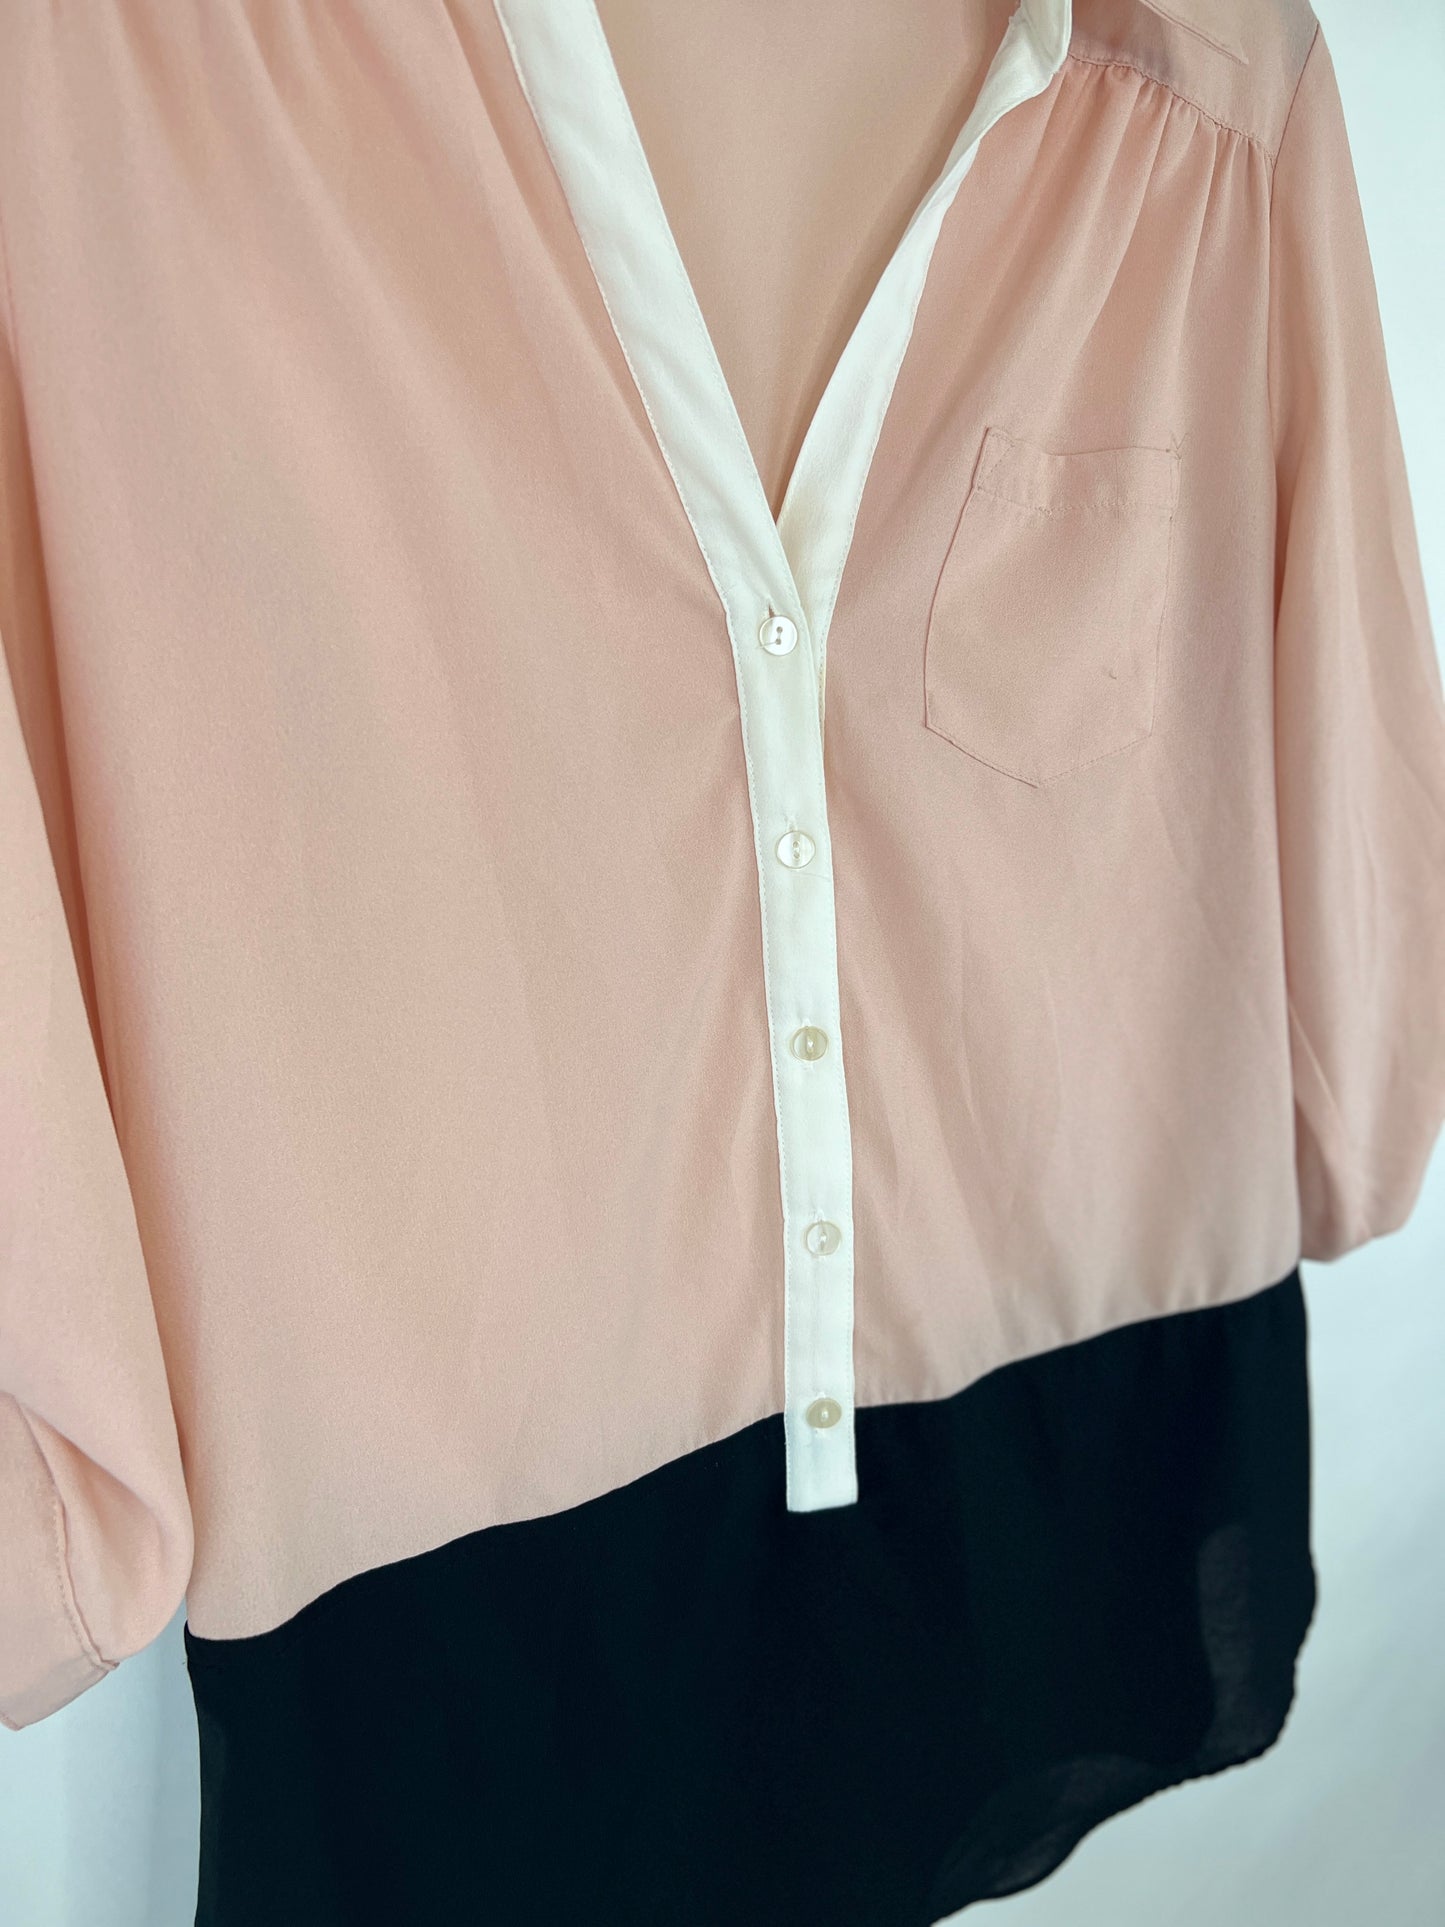 Blush Pink and Black with White Detail Button Up Collared 3/4 Sleeve Dress Shirt - M